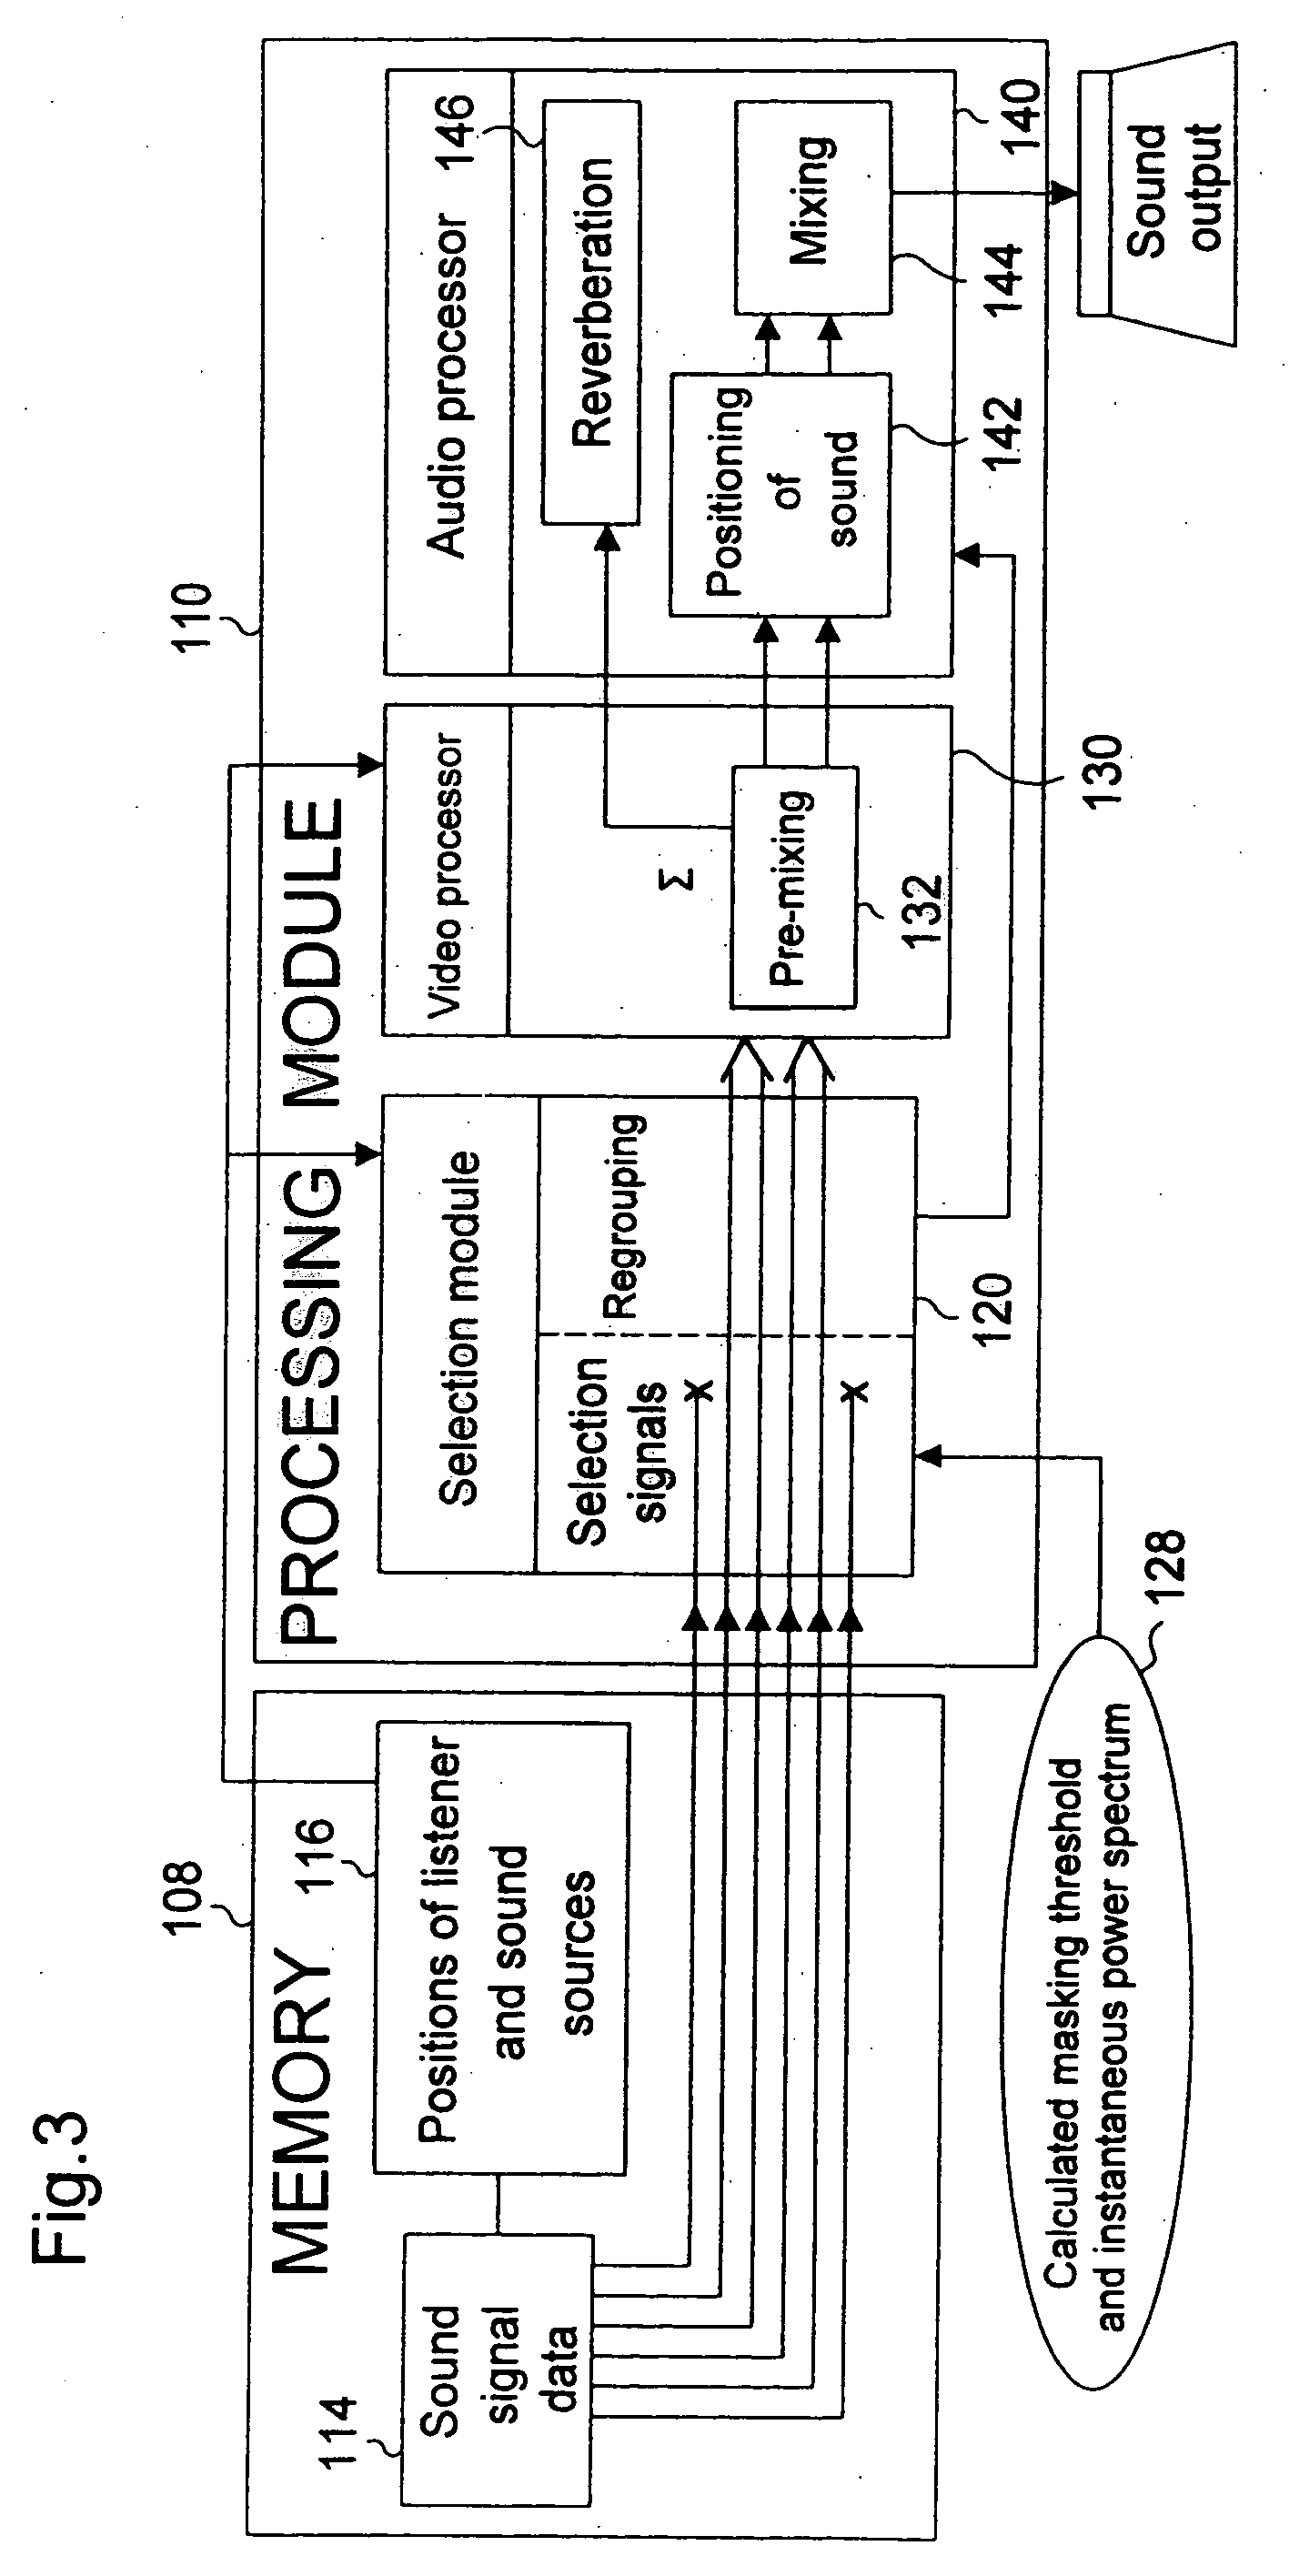 Perfected device and method for the spatialization of sound